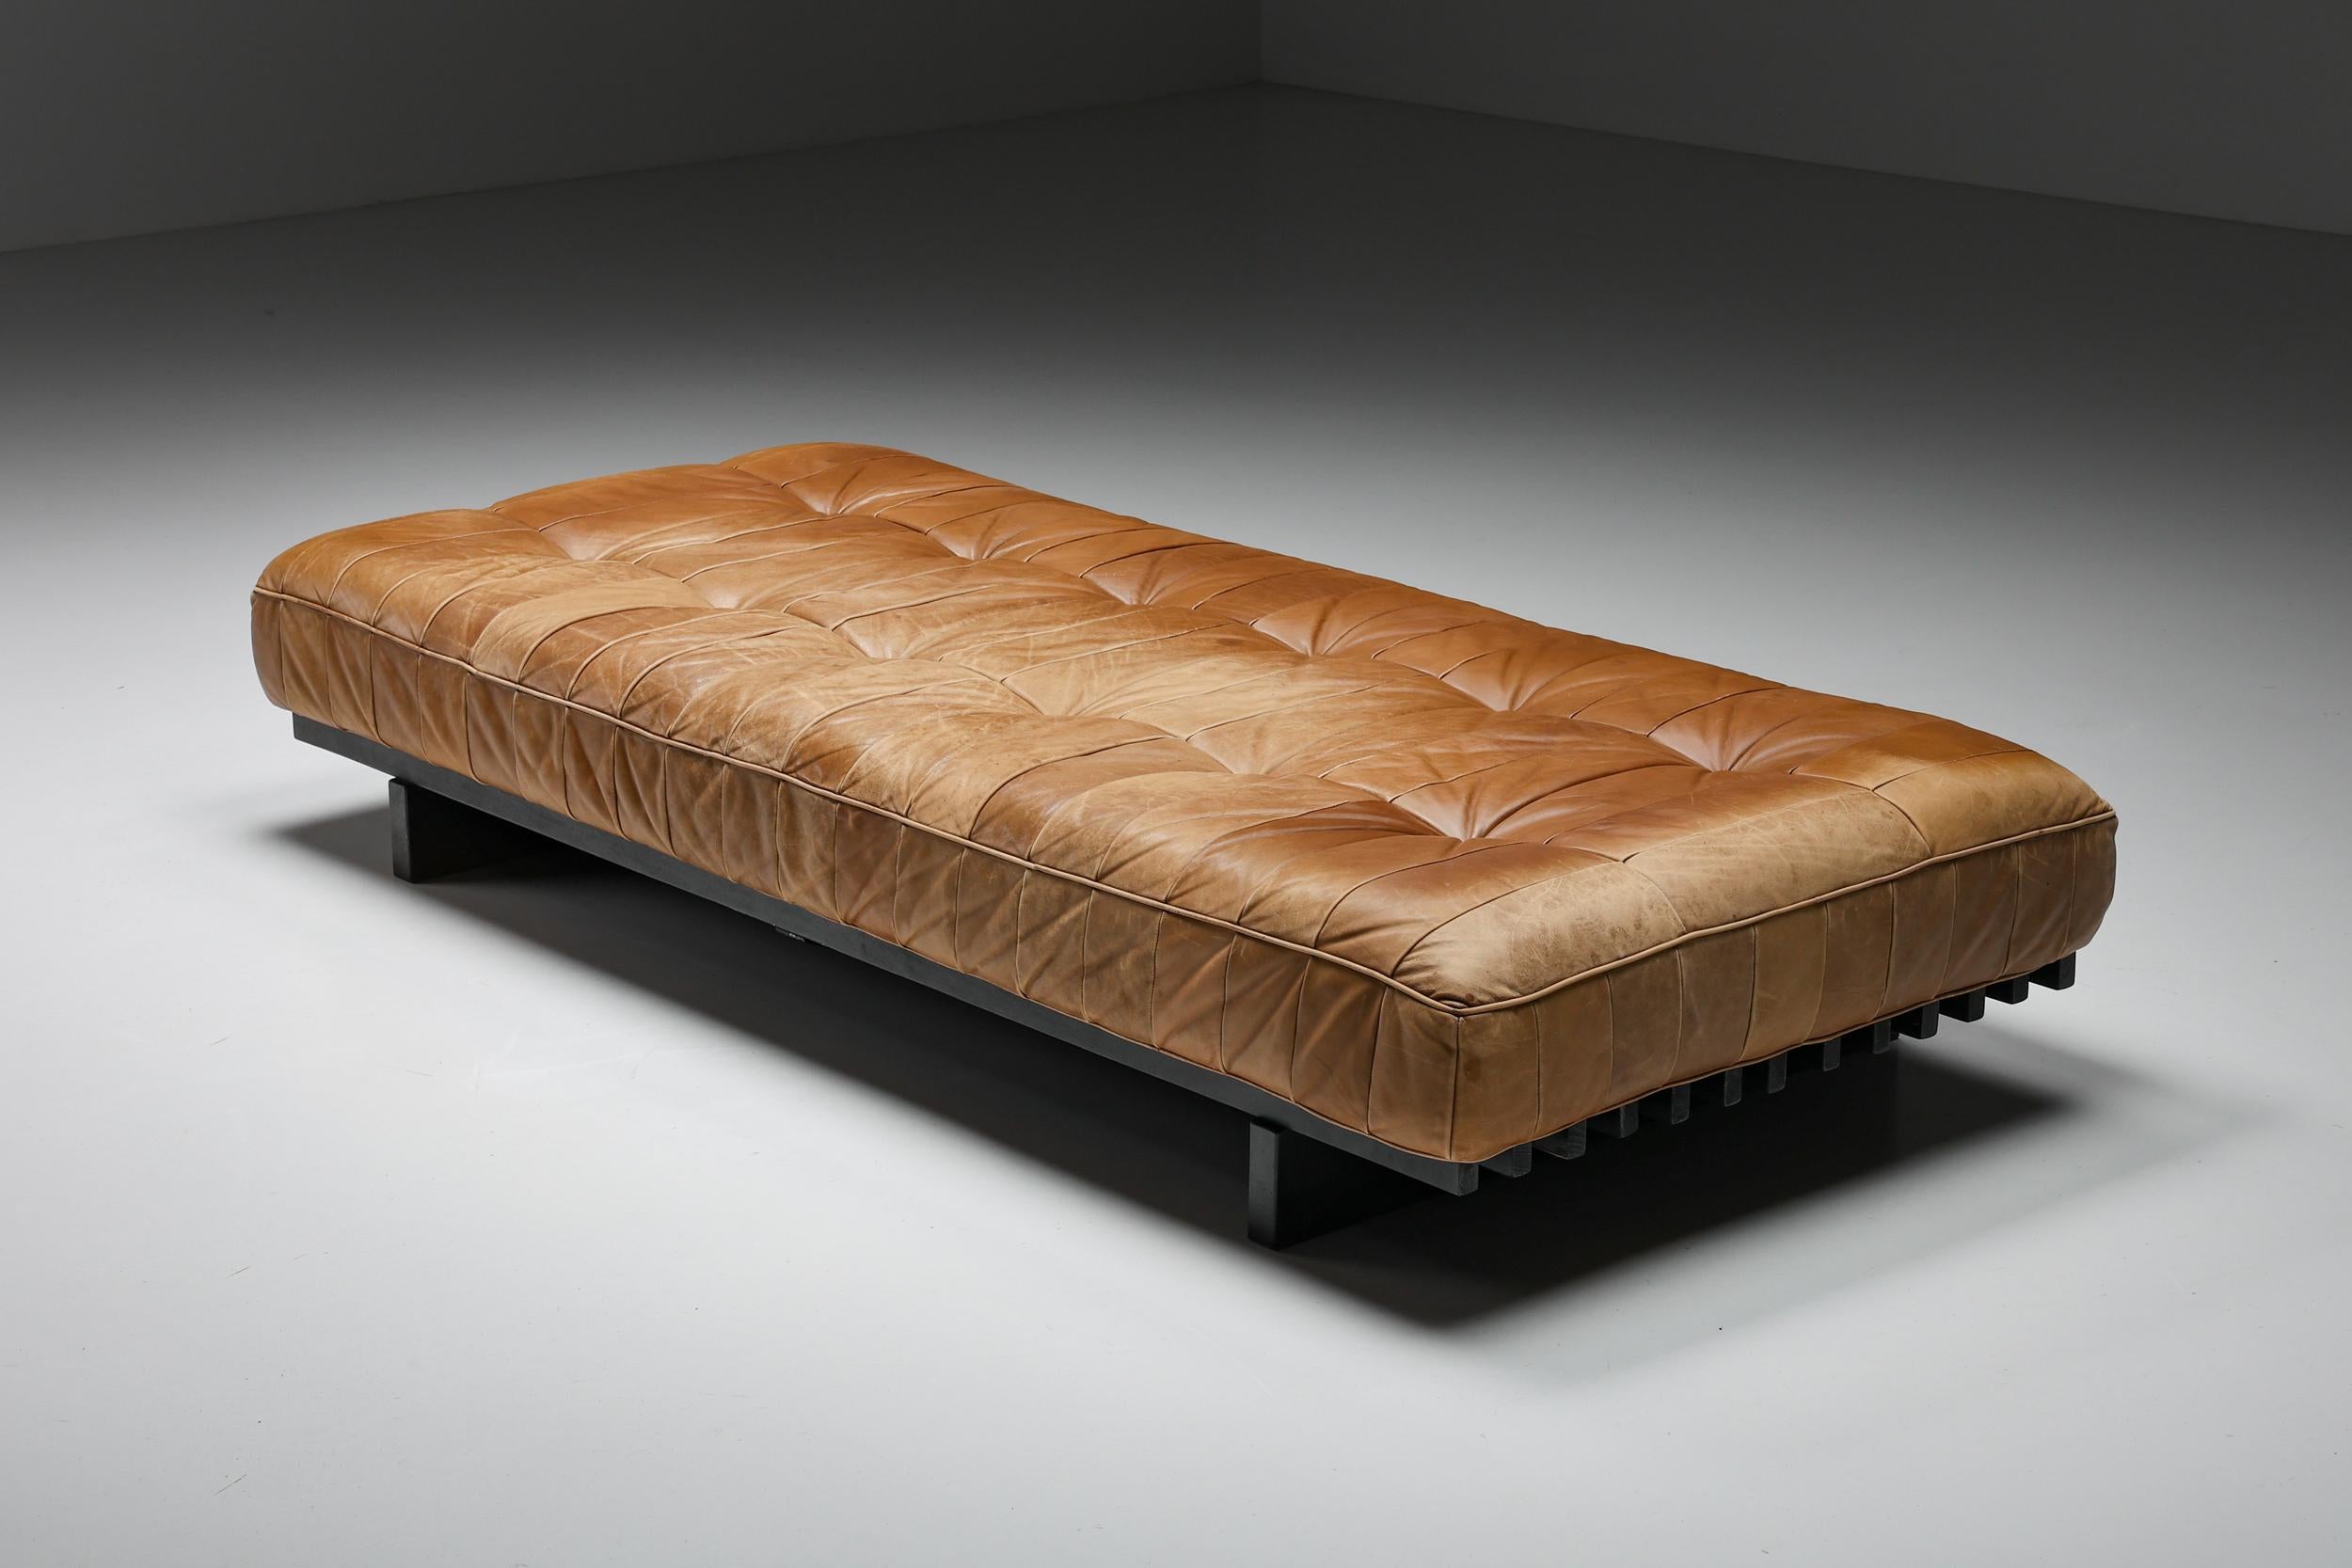 De Sede DS 80 Patchwork Cognac Leather Daybed, Switzerland, 1960's;

Rare and highly desirable modular original daybed that includes three cushions. Hand-built in the 1960s by De Sede craftsman in Switzerland and upholstered in stunning soft